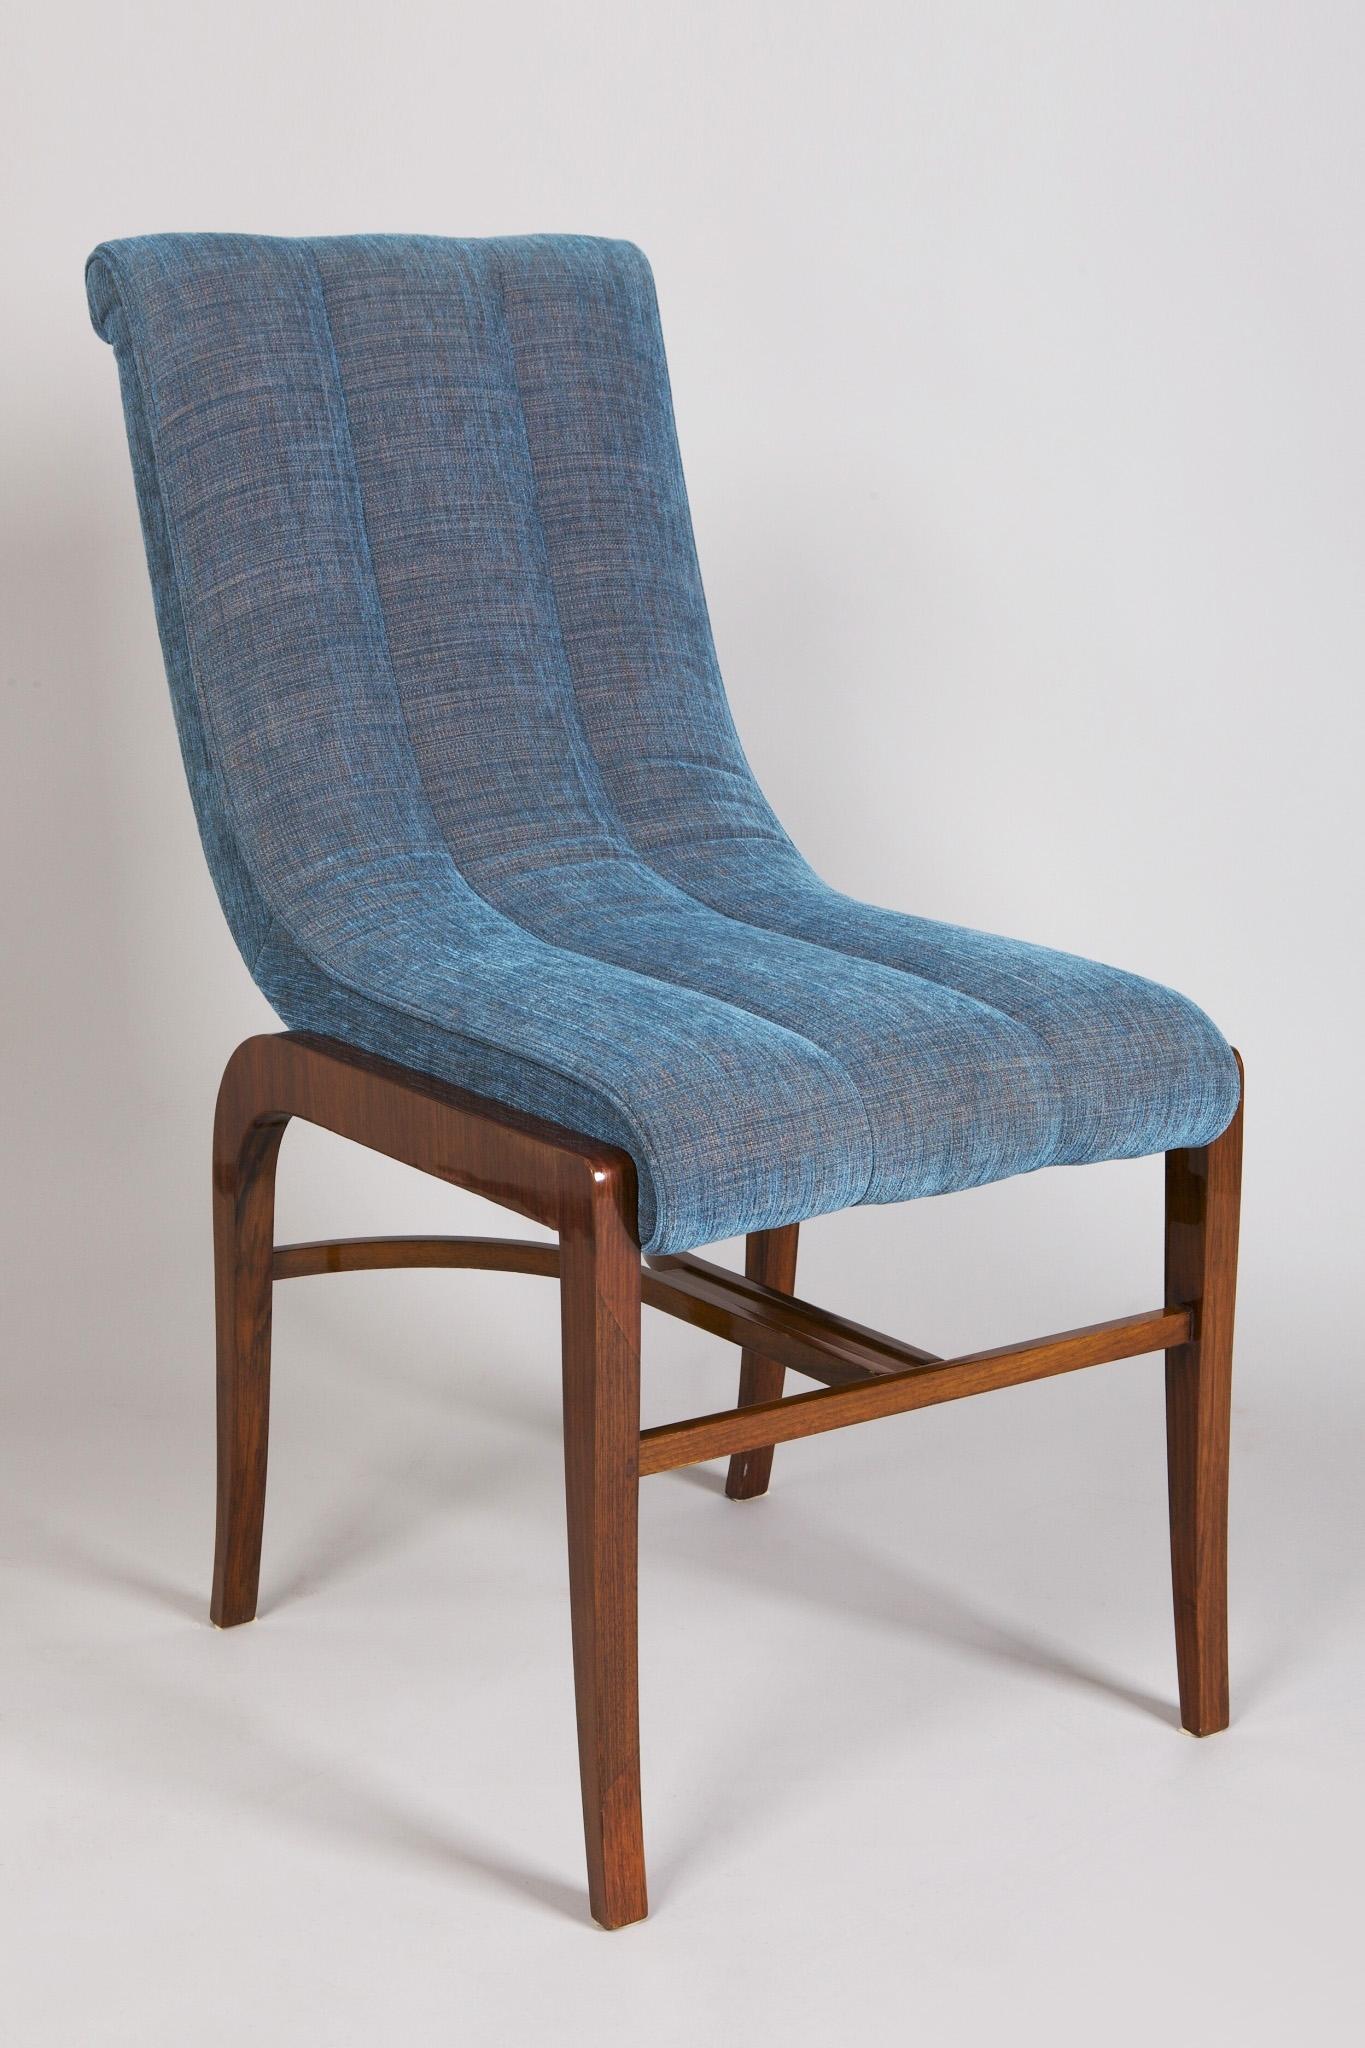 Restored French Art Deco Chairs Designed by Jules Leleu, 1920-1929, 2 Pieces For Sale 1